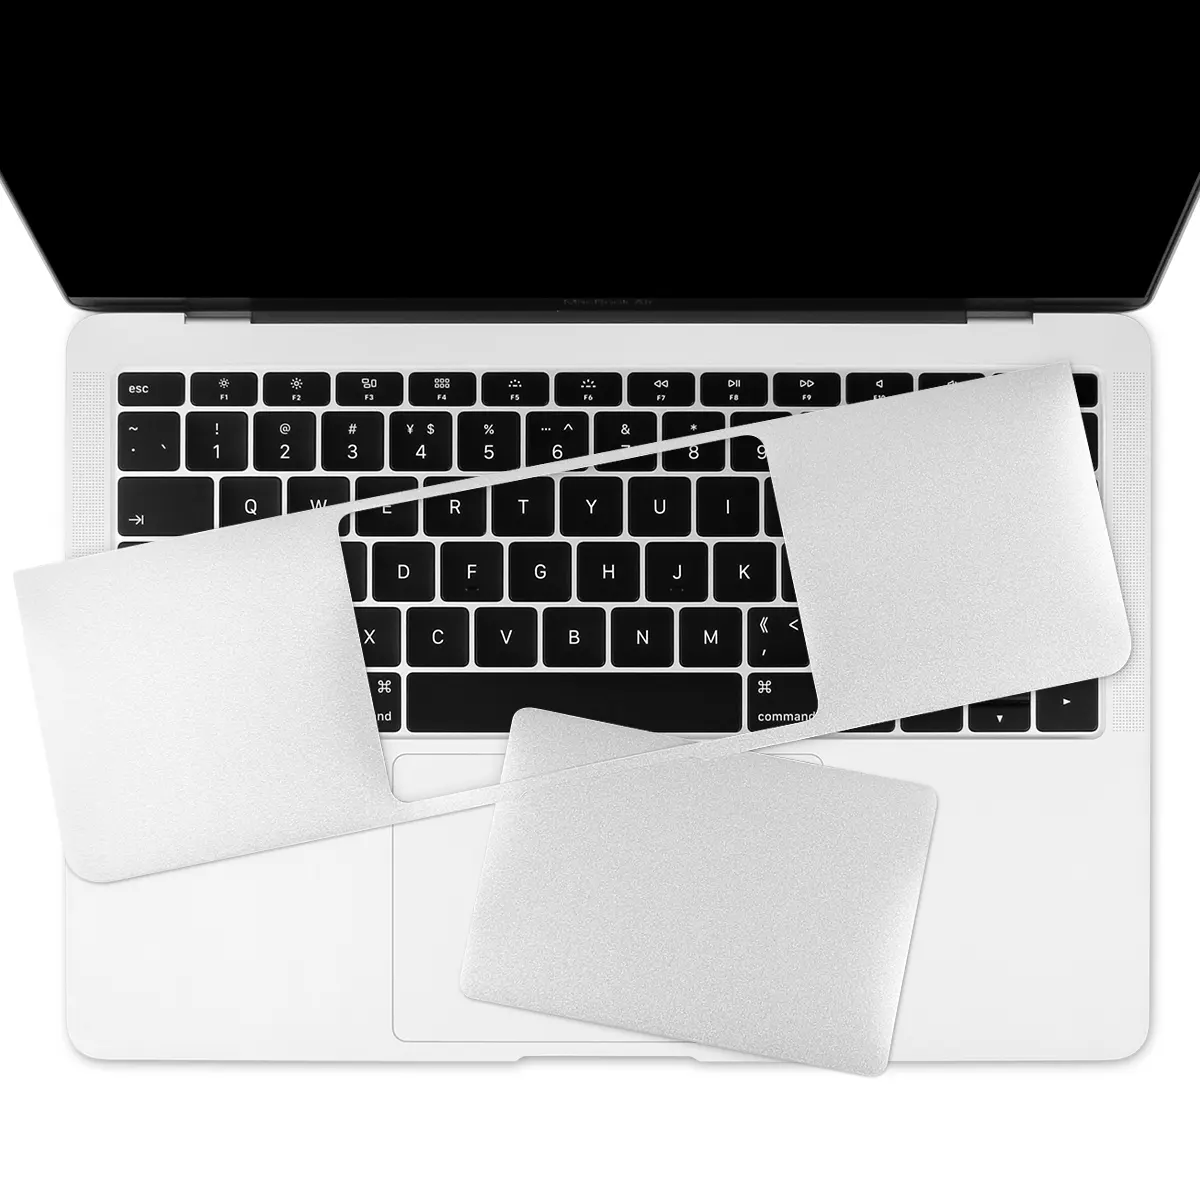 For Palm+Touch Pad Sticker & Trackpad Protector Skin for MacBook Air Pro Retina 13 15 16 inch Touch Bar 2019 2020 A2289 A2338 M1